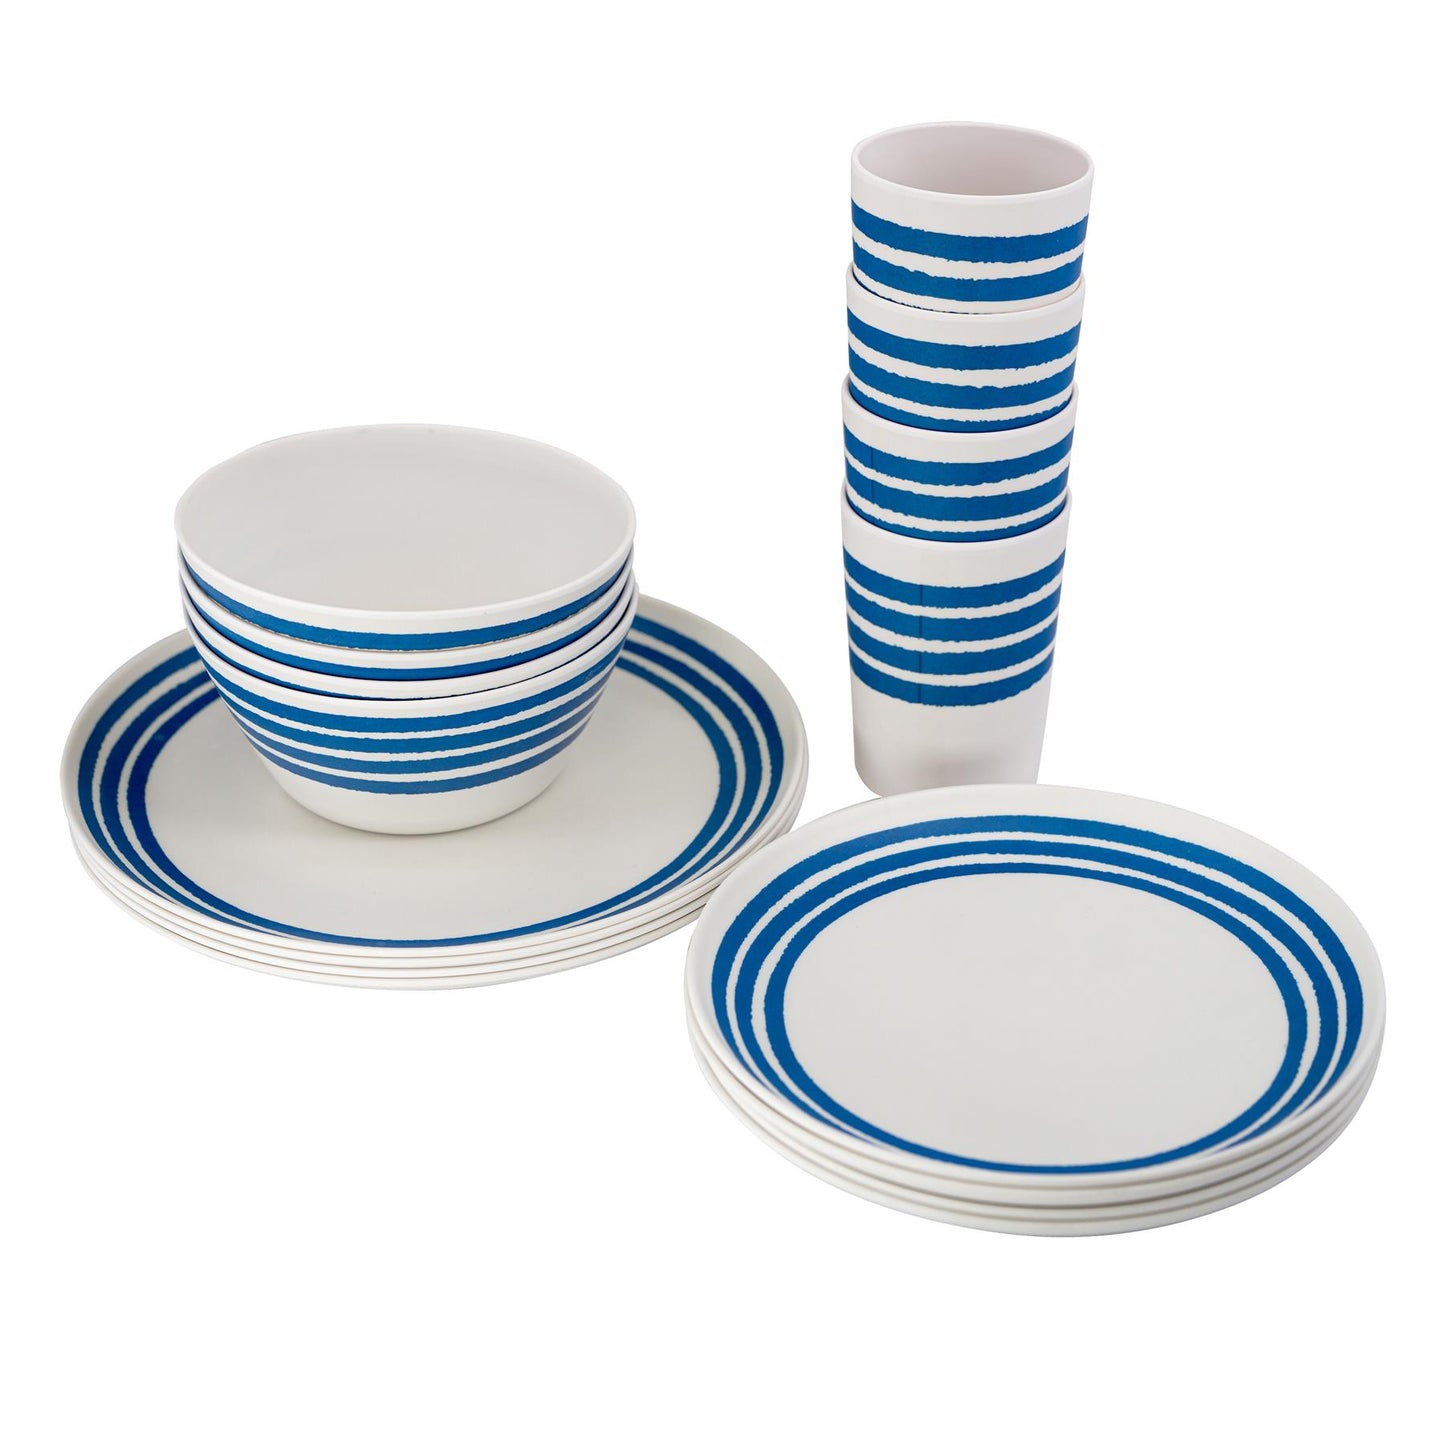 Melamine Camping Dinner Set For Four 16 Pieces by Geezy - UKBuyZone